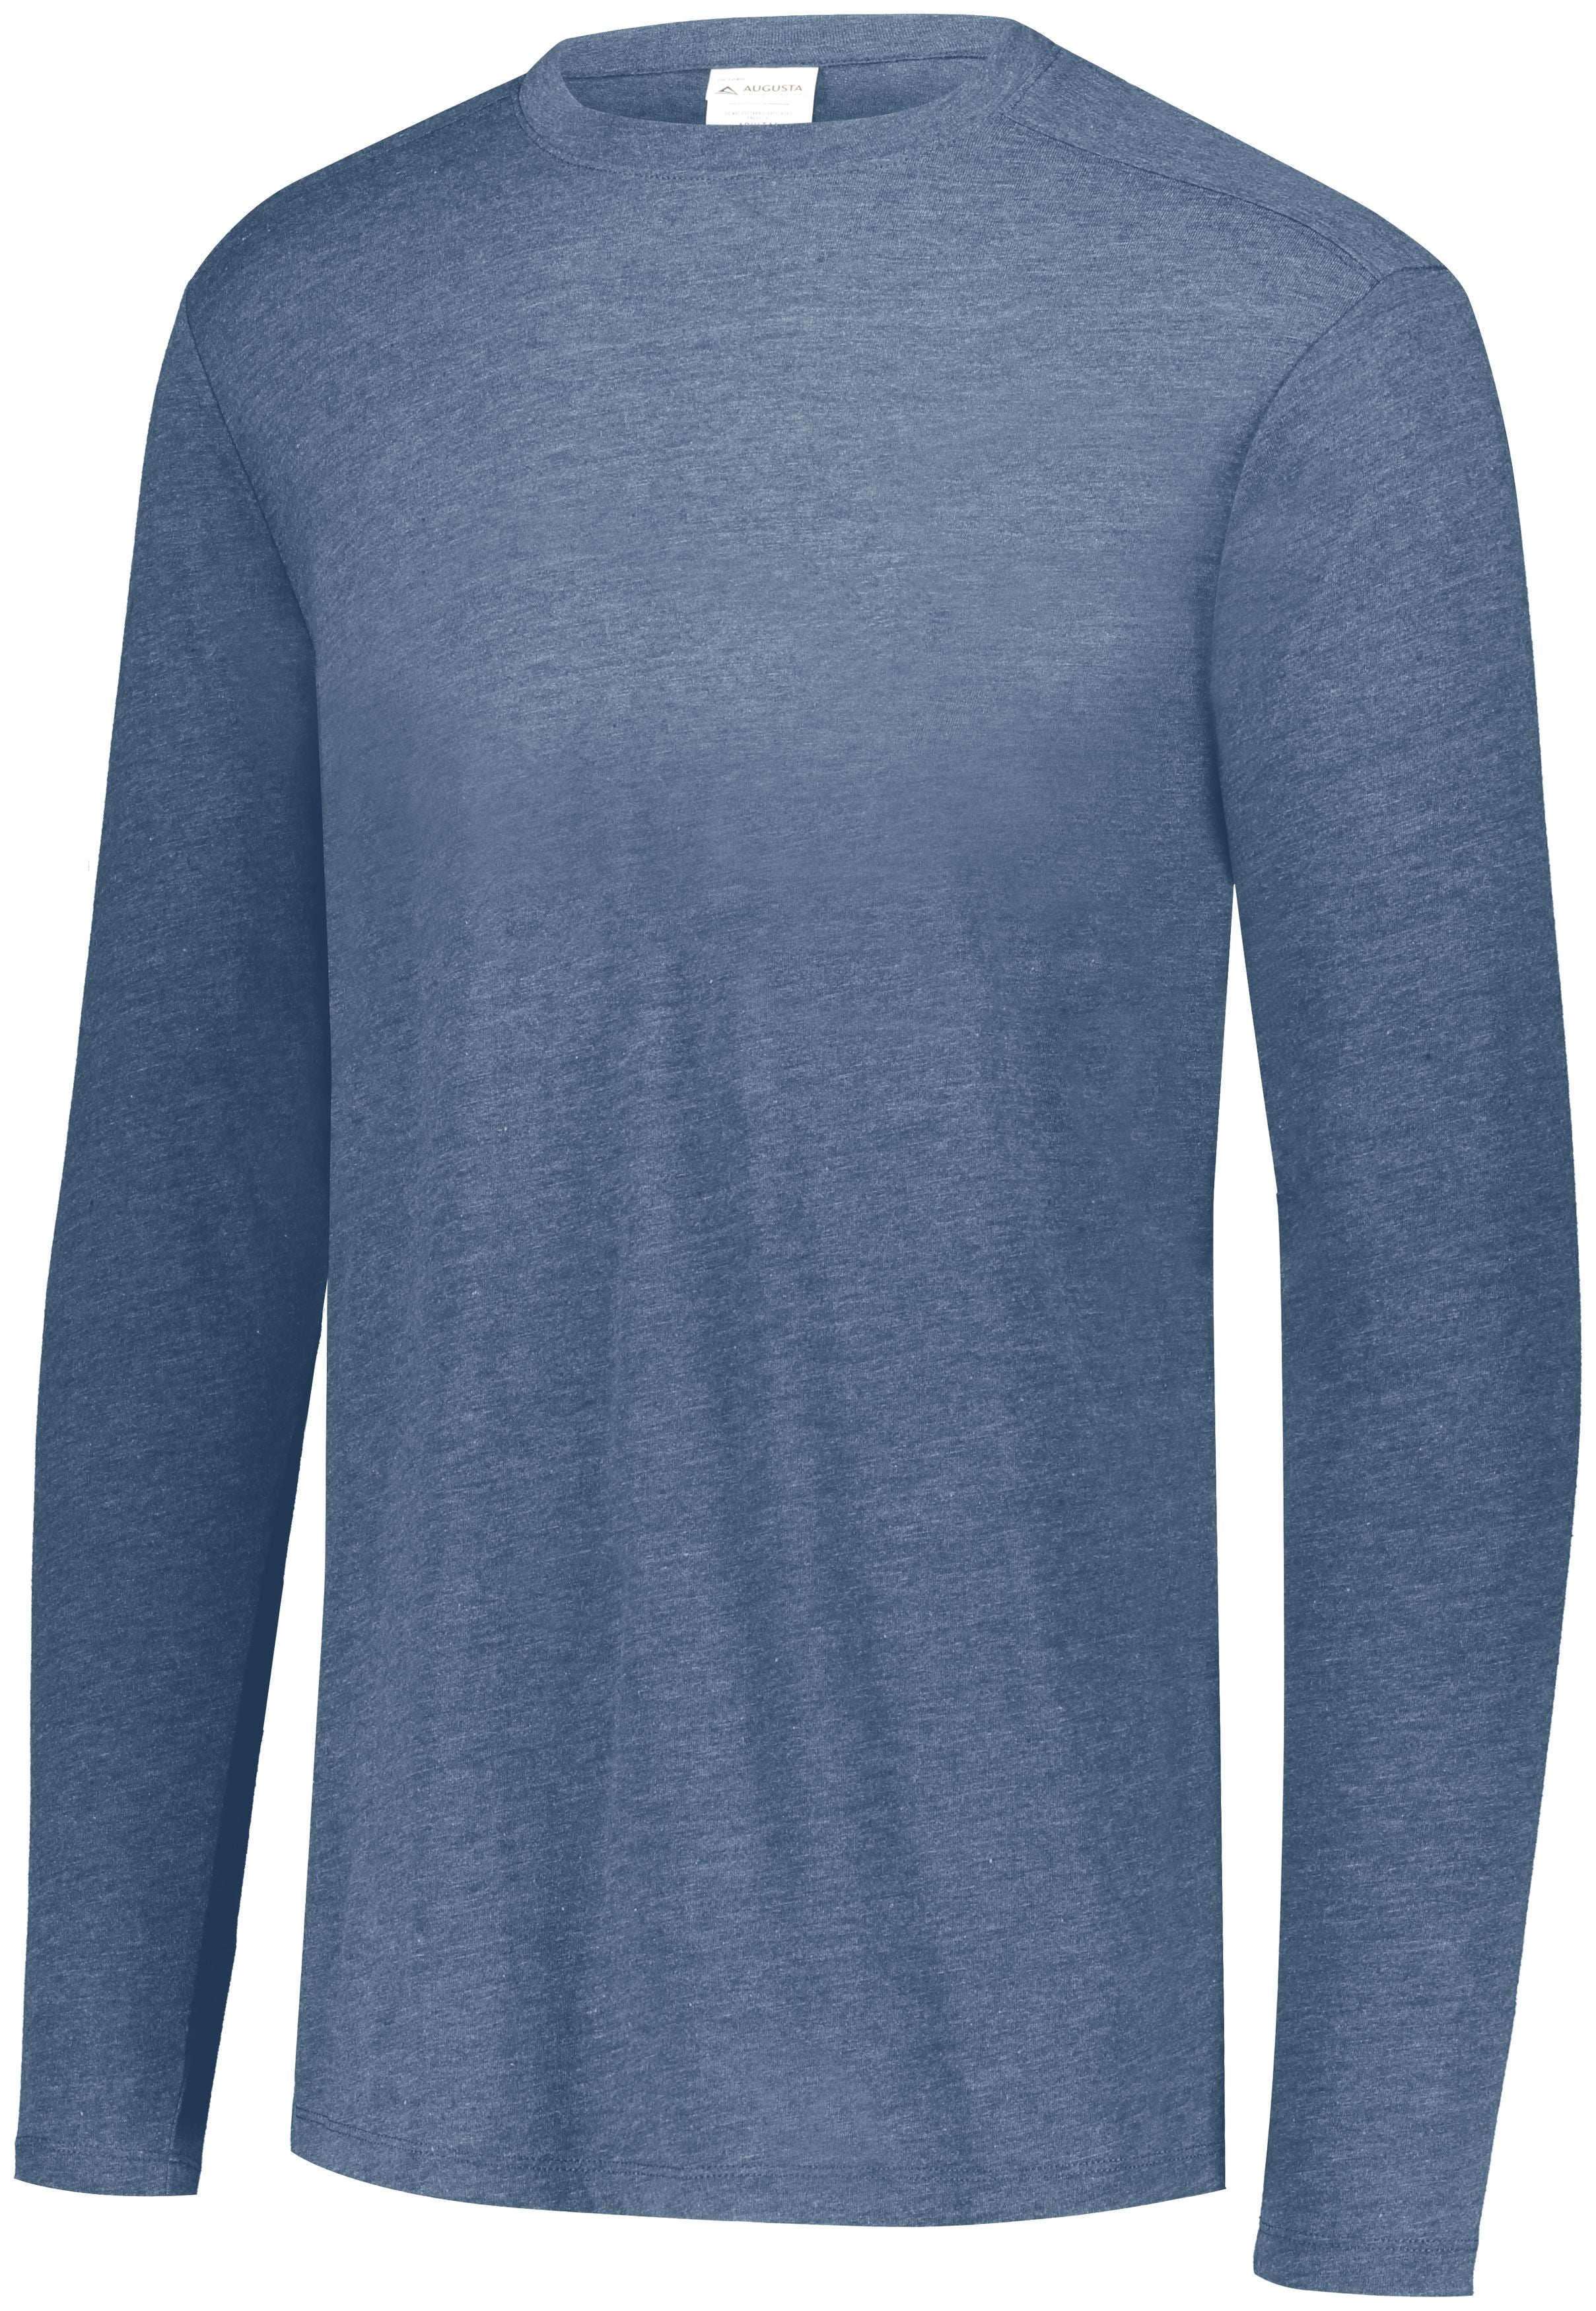 Augusta Sportswear Tri-Blend Long Sleeve Crew in Storm Heather  -Part of the Adult, Augusta-Products, Shirts product lines at KanaleyCreations.com